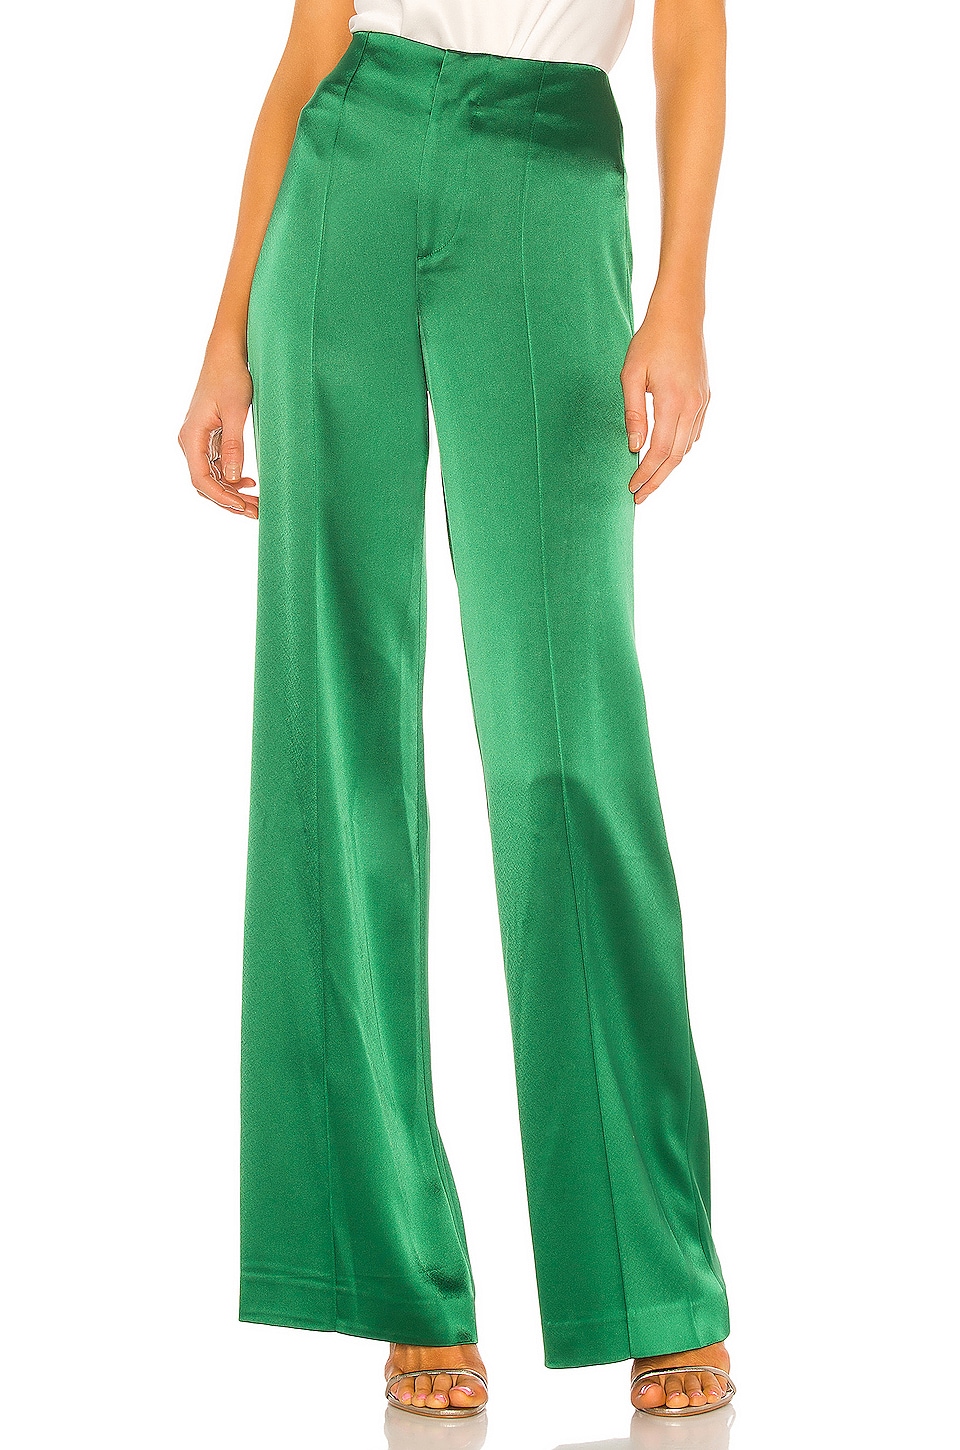 Alice + Olivia Dylan Clean High Waist Wide Leg Pant in Basil | REVOLVE